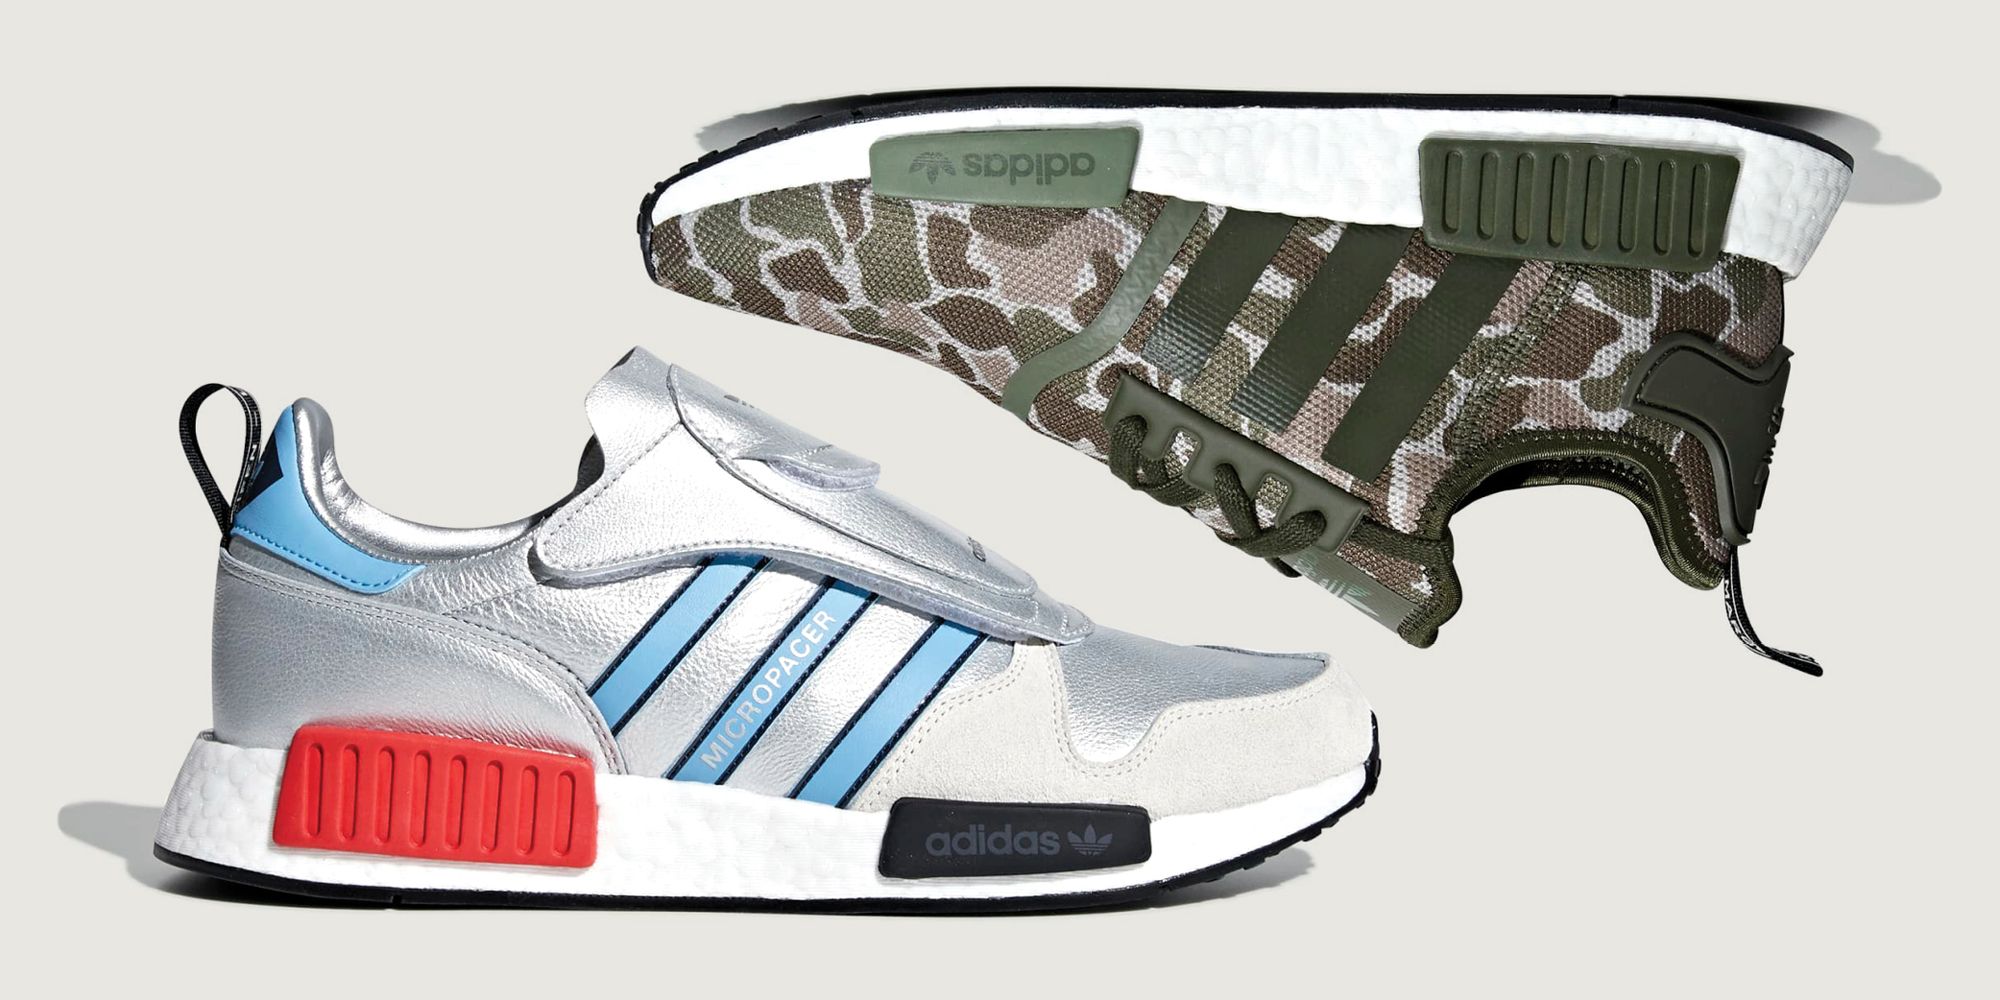 Adidas NMD Releases | New Adidas 2018